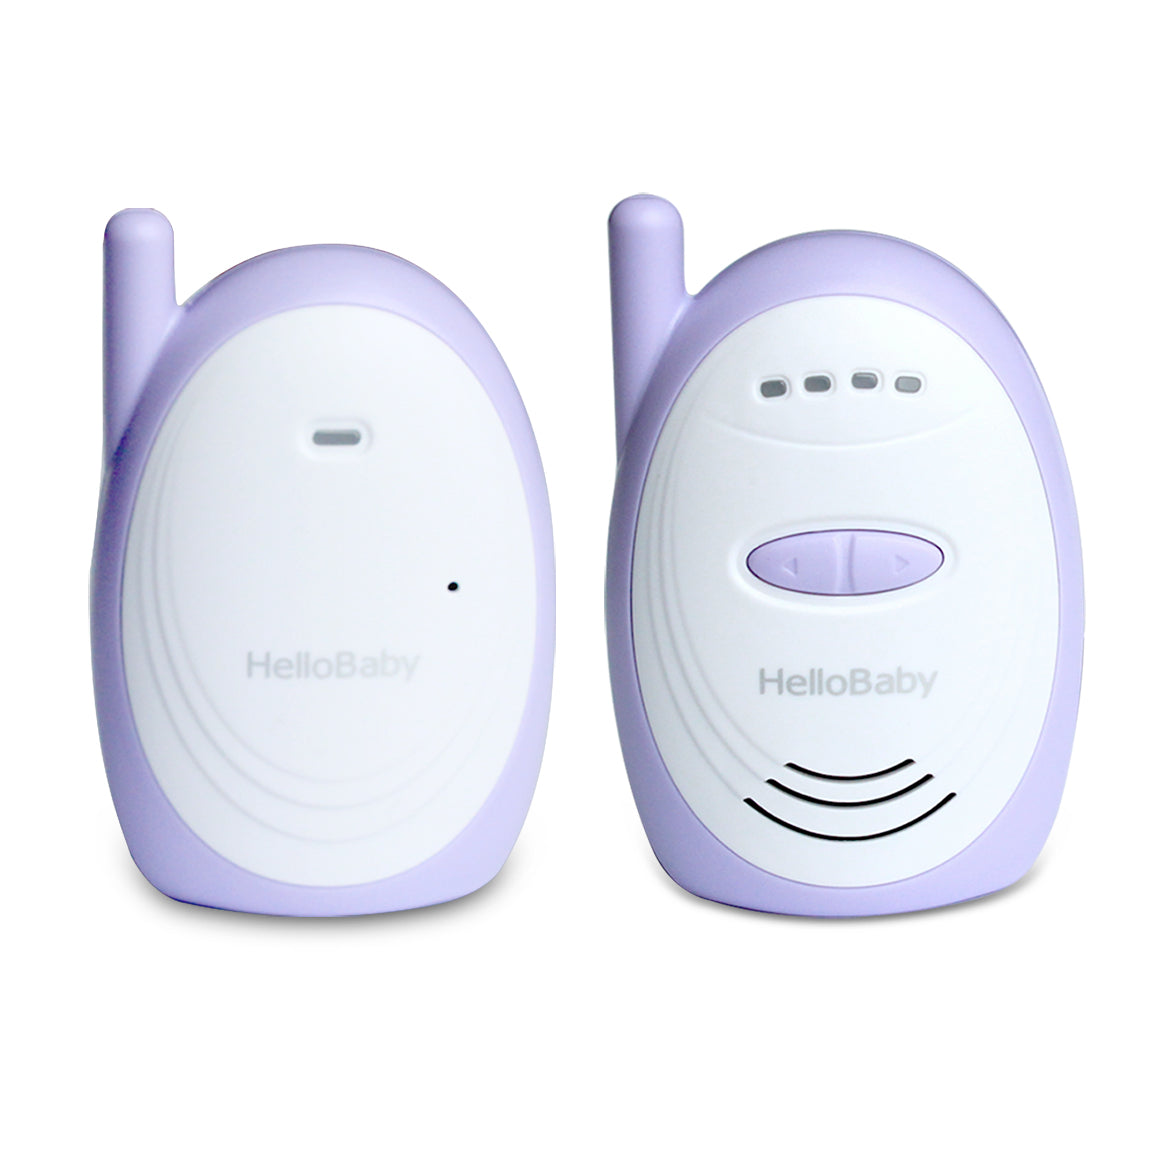 hellobaby best baby monitor - HB168-Digital Audio Baby Monitor with up to 1000 ft of Range  